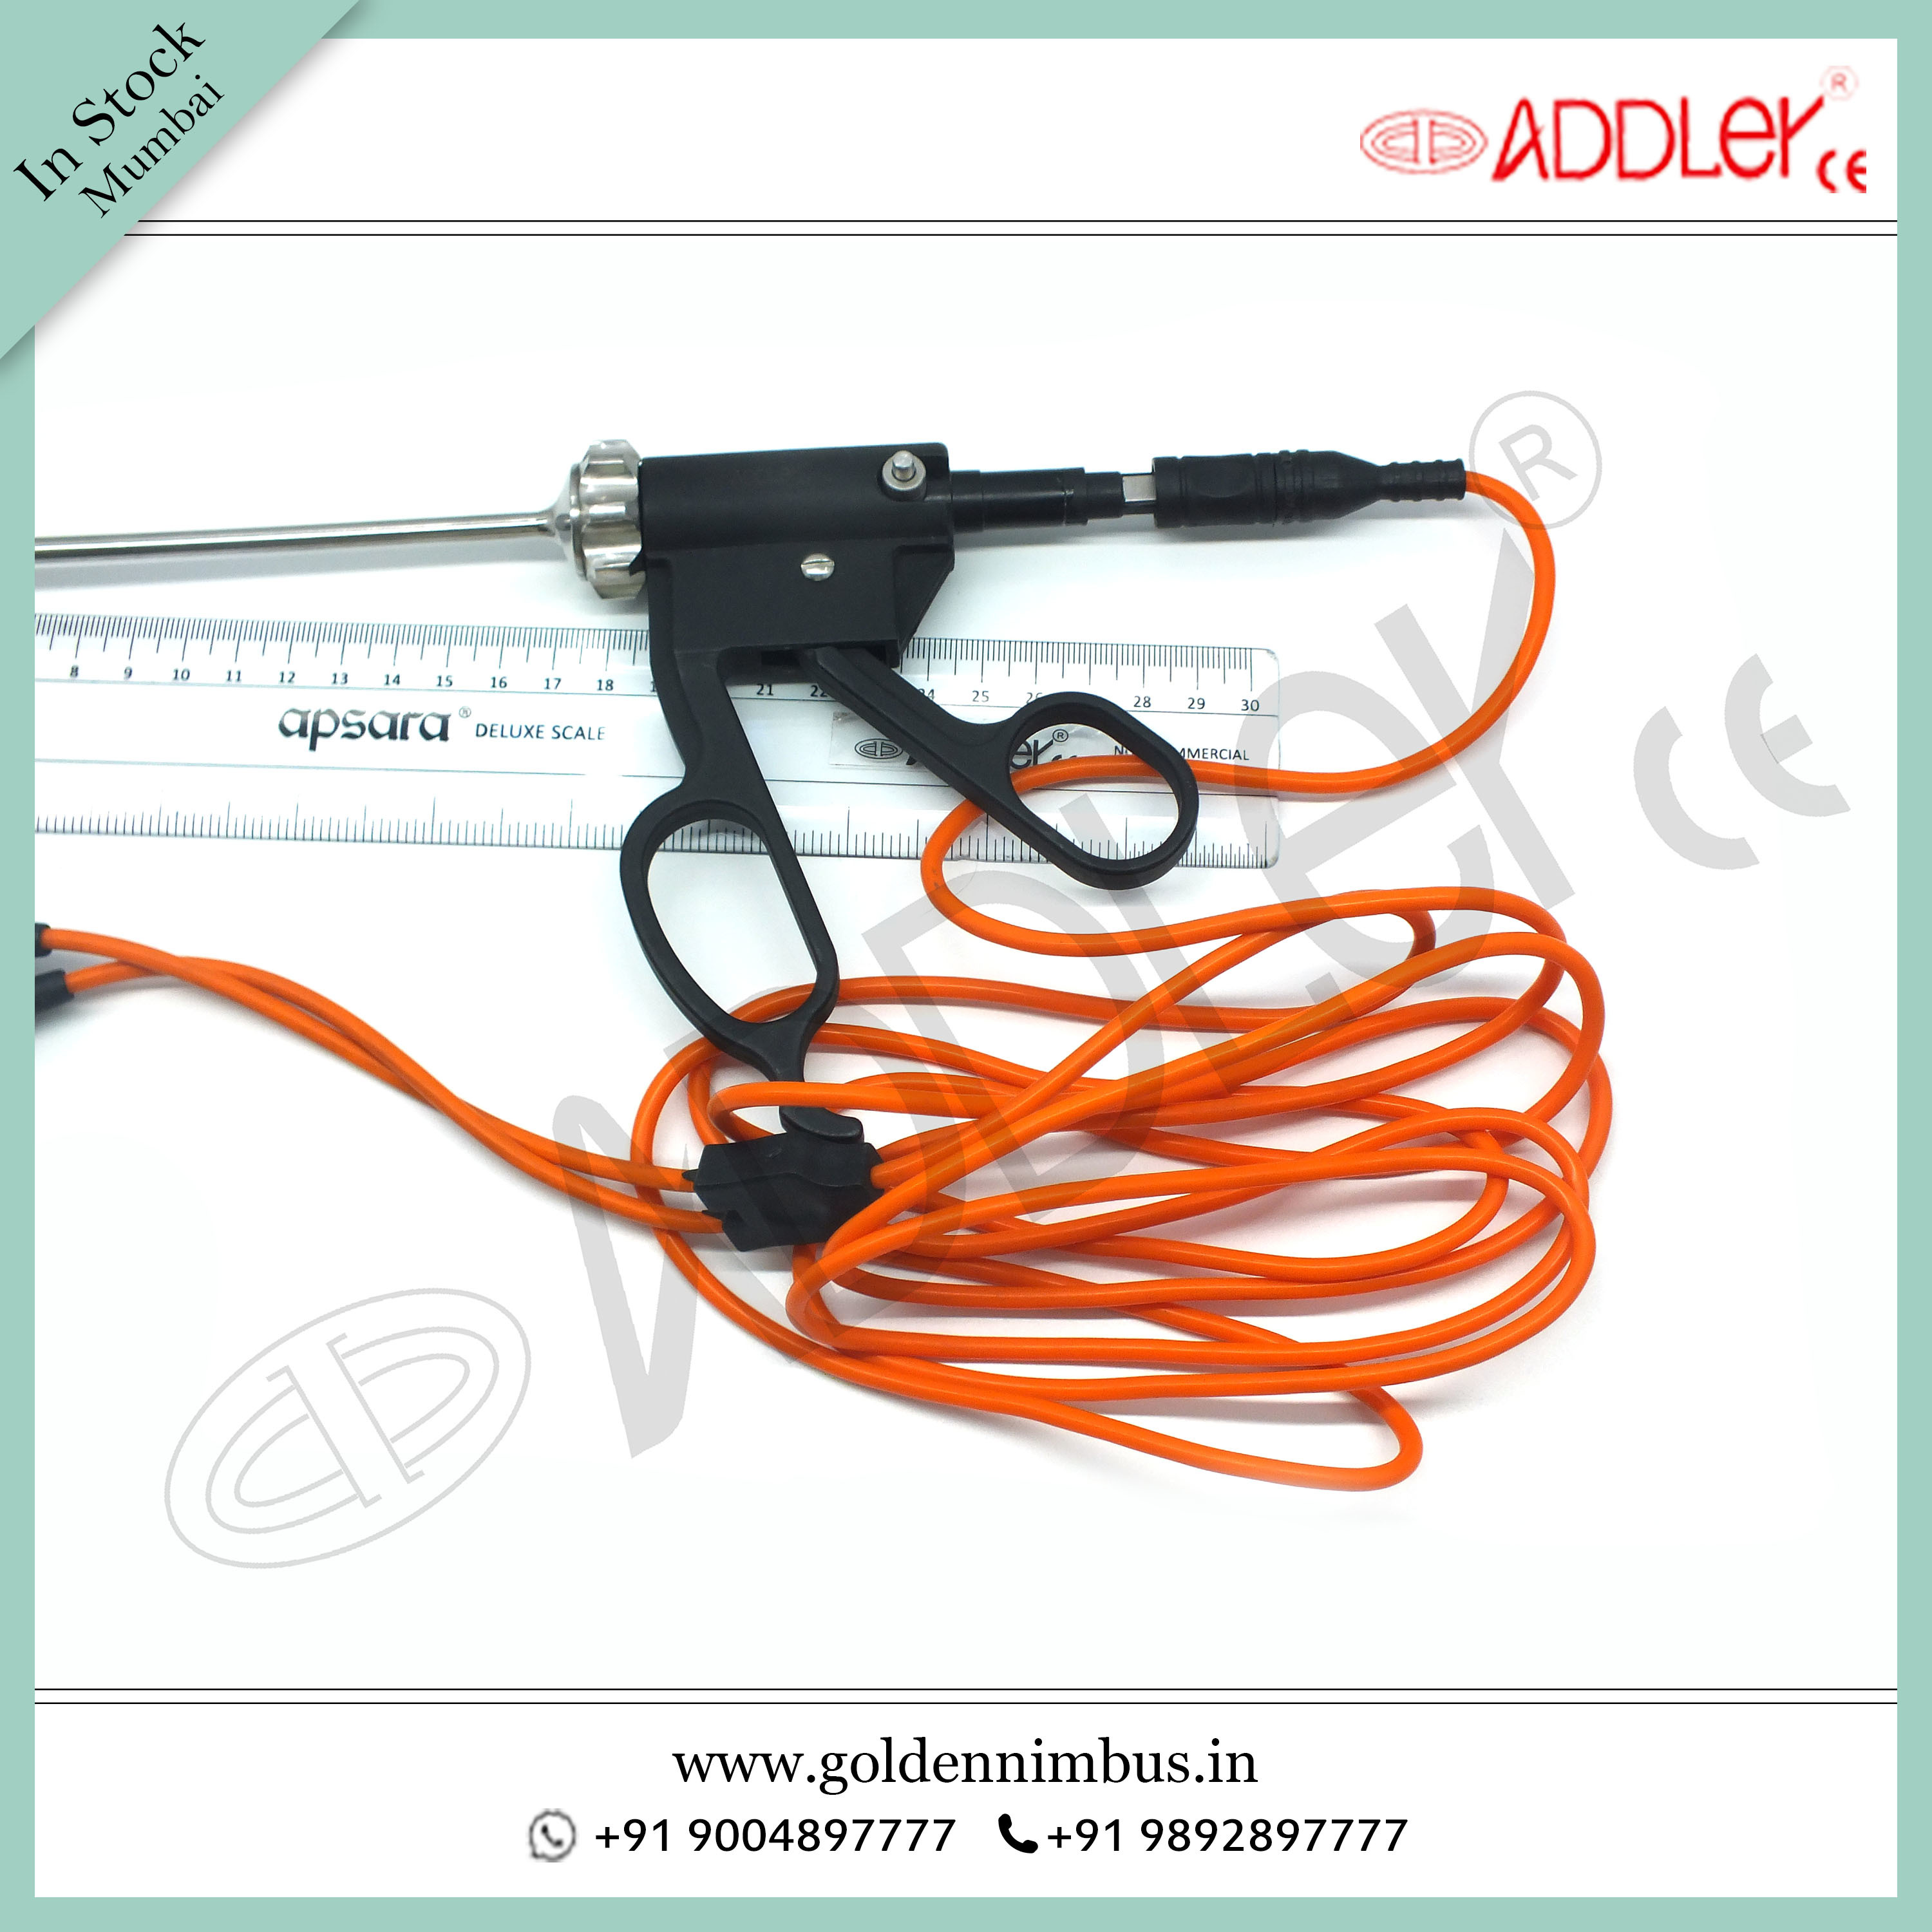 ADDLER Laparoscopic Bessanger Maryland with Bipolar Cable